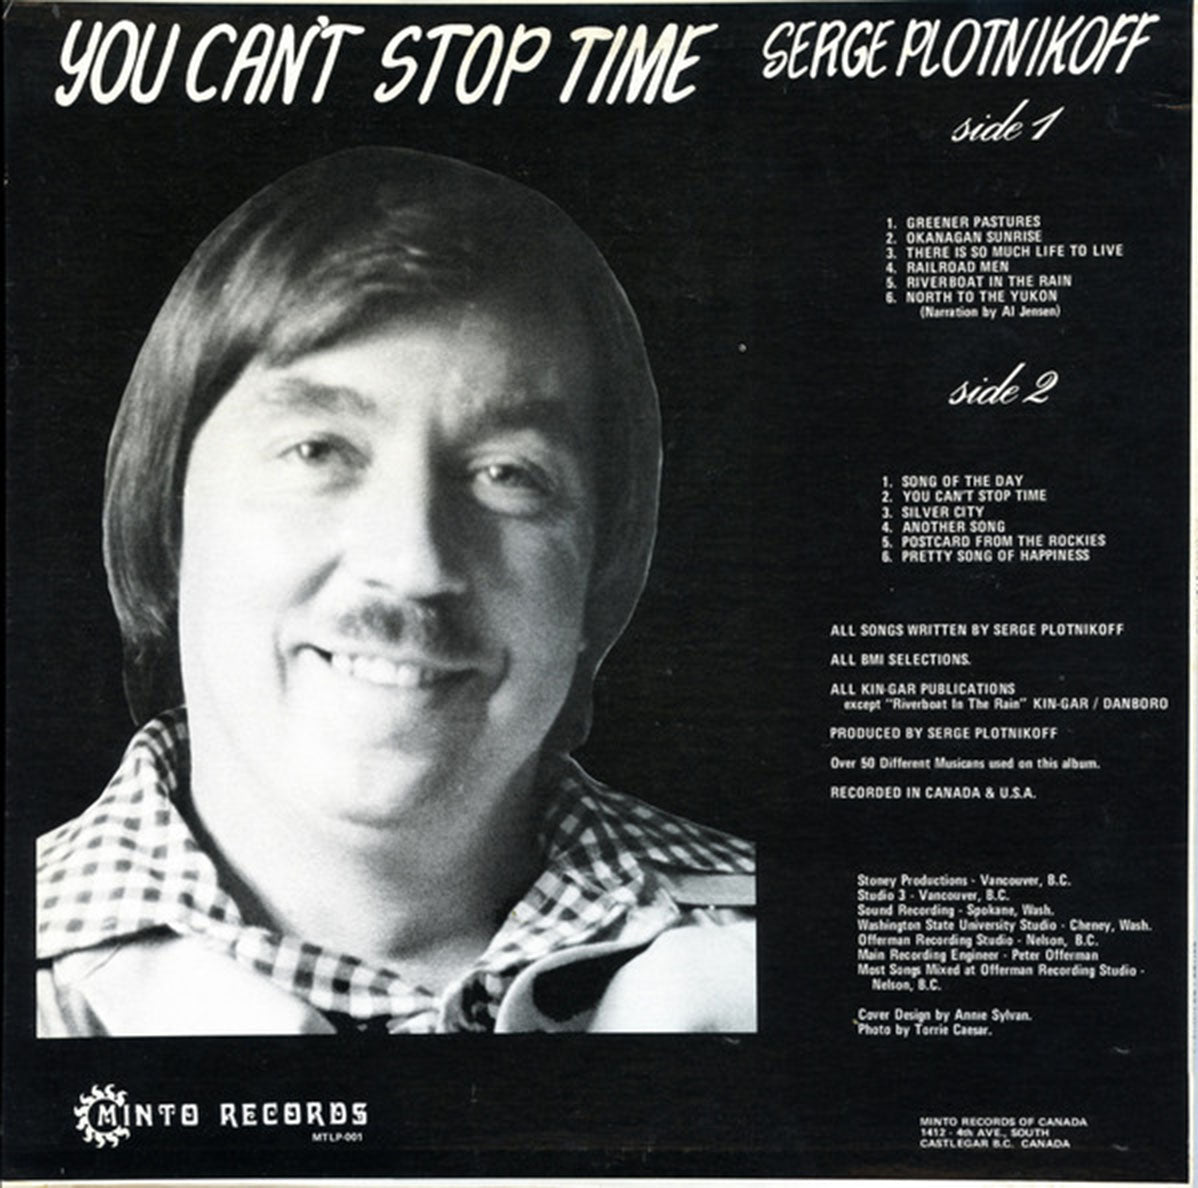 Serge Plotnikoff – You Can't Stop Time - RARE - Sealed!